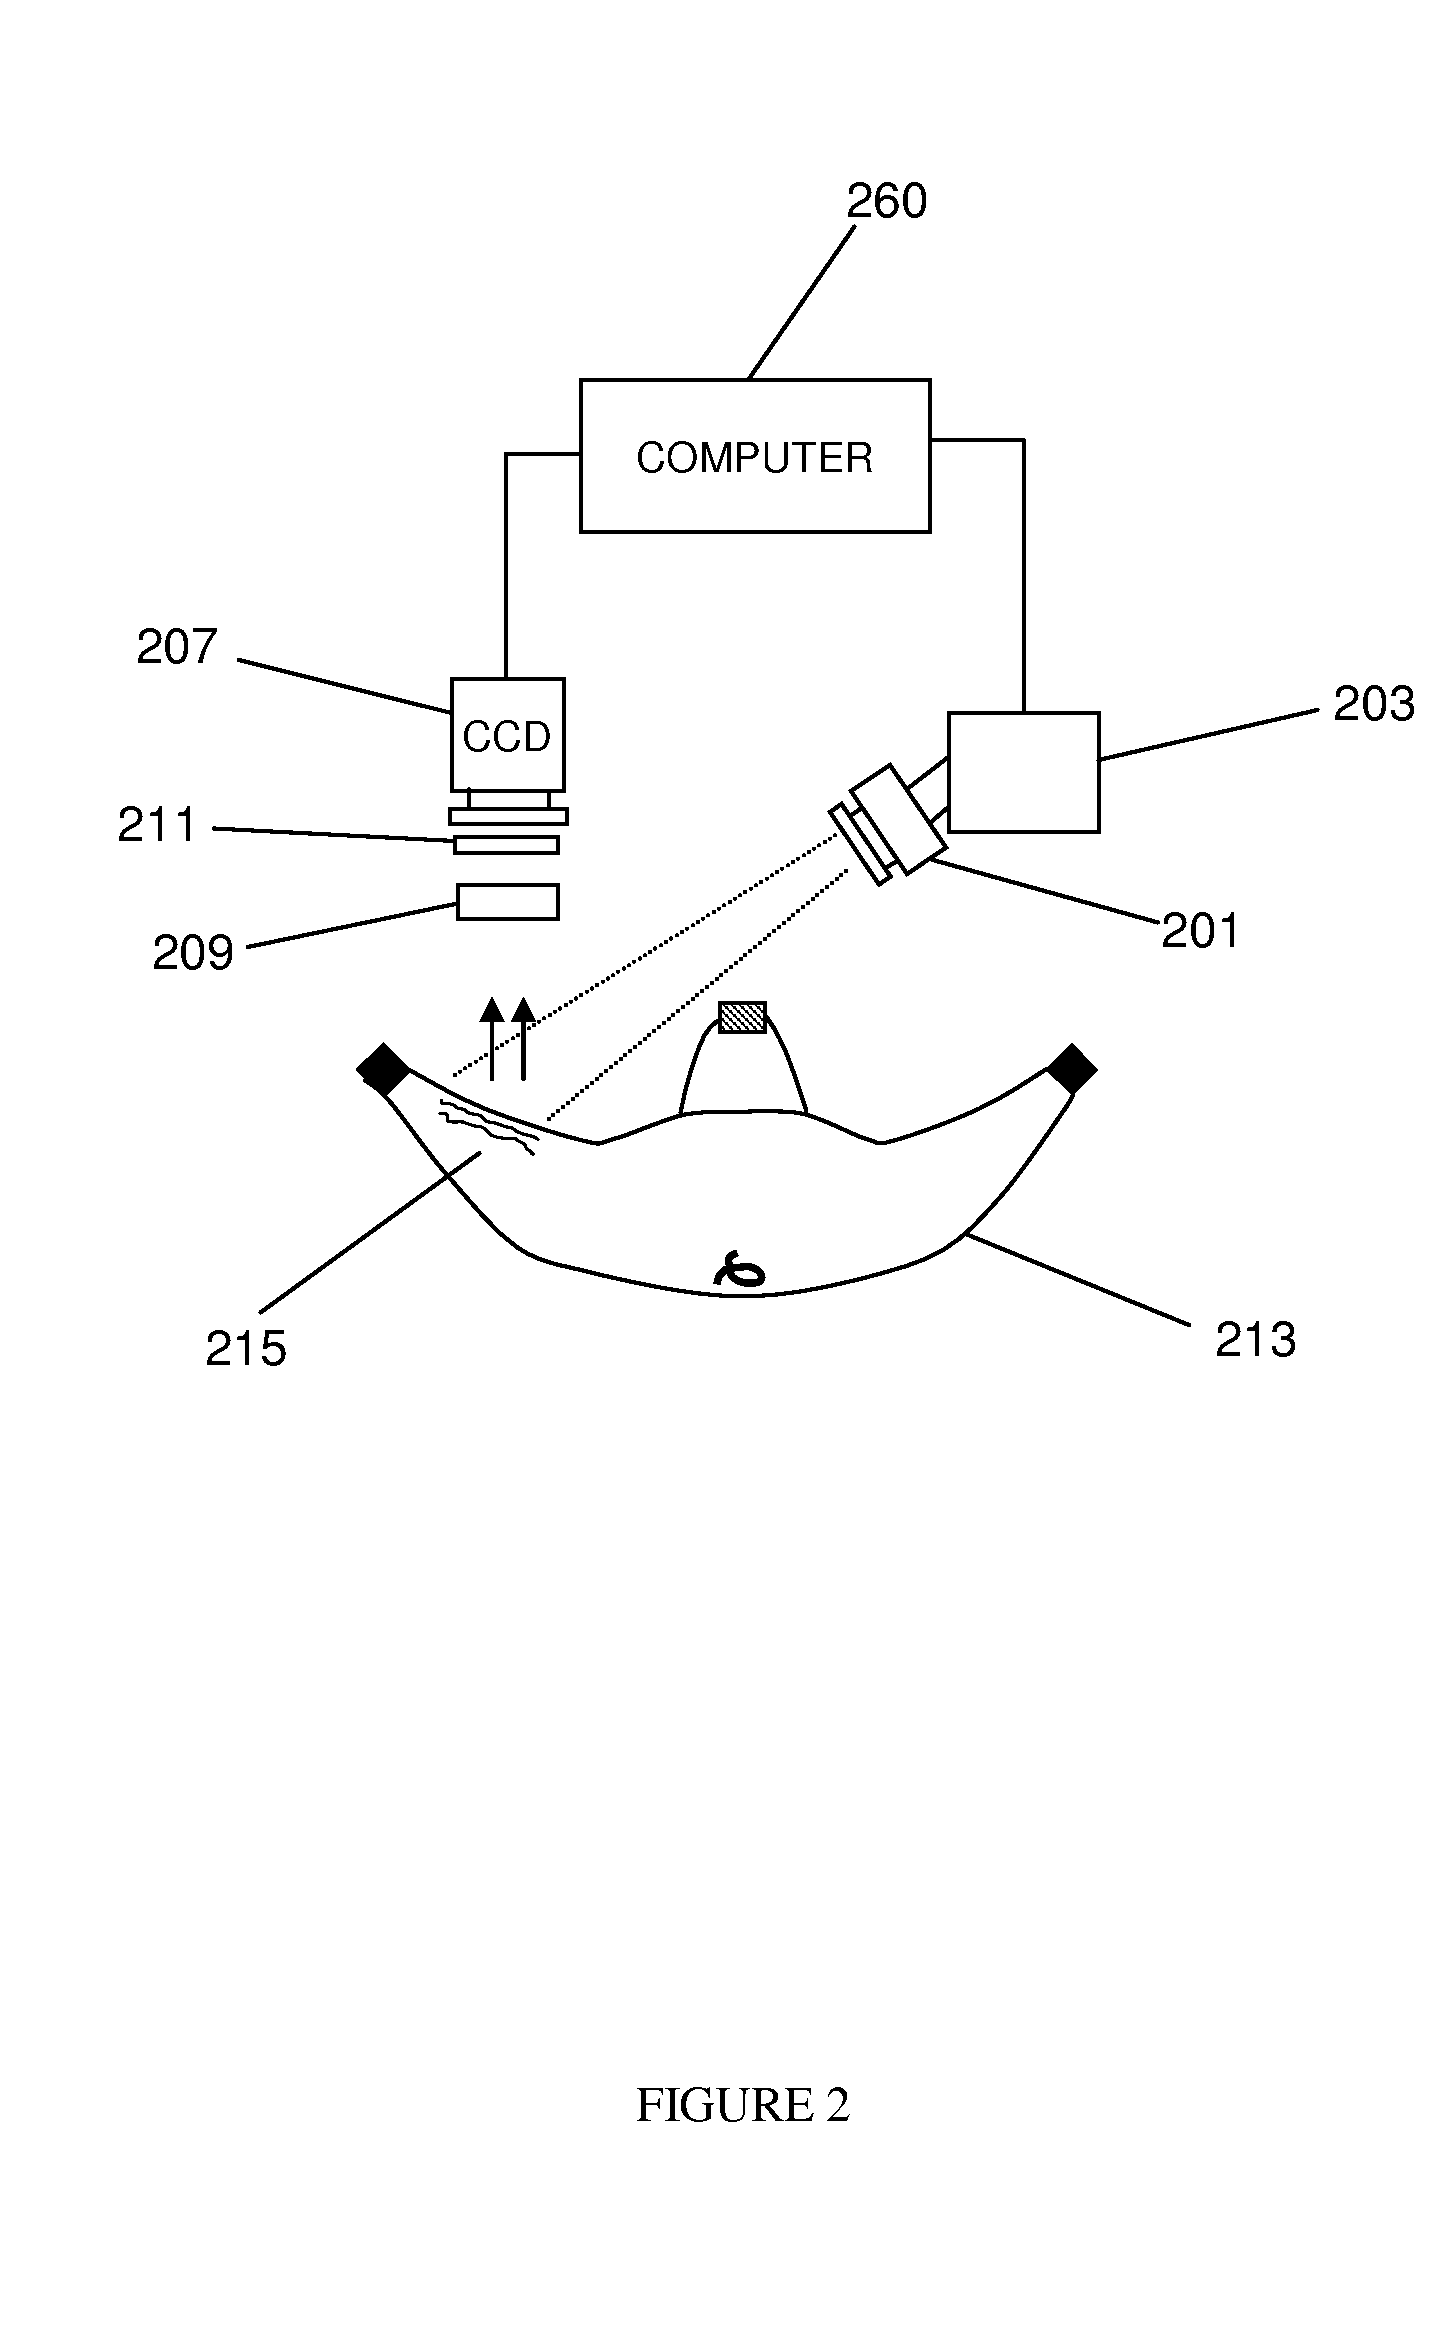 Method of measuring propulsion in lymphatic structures